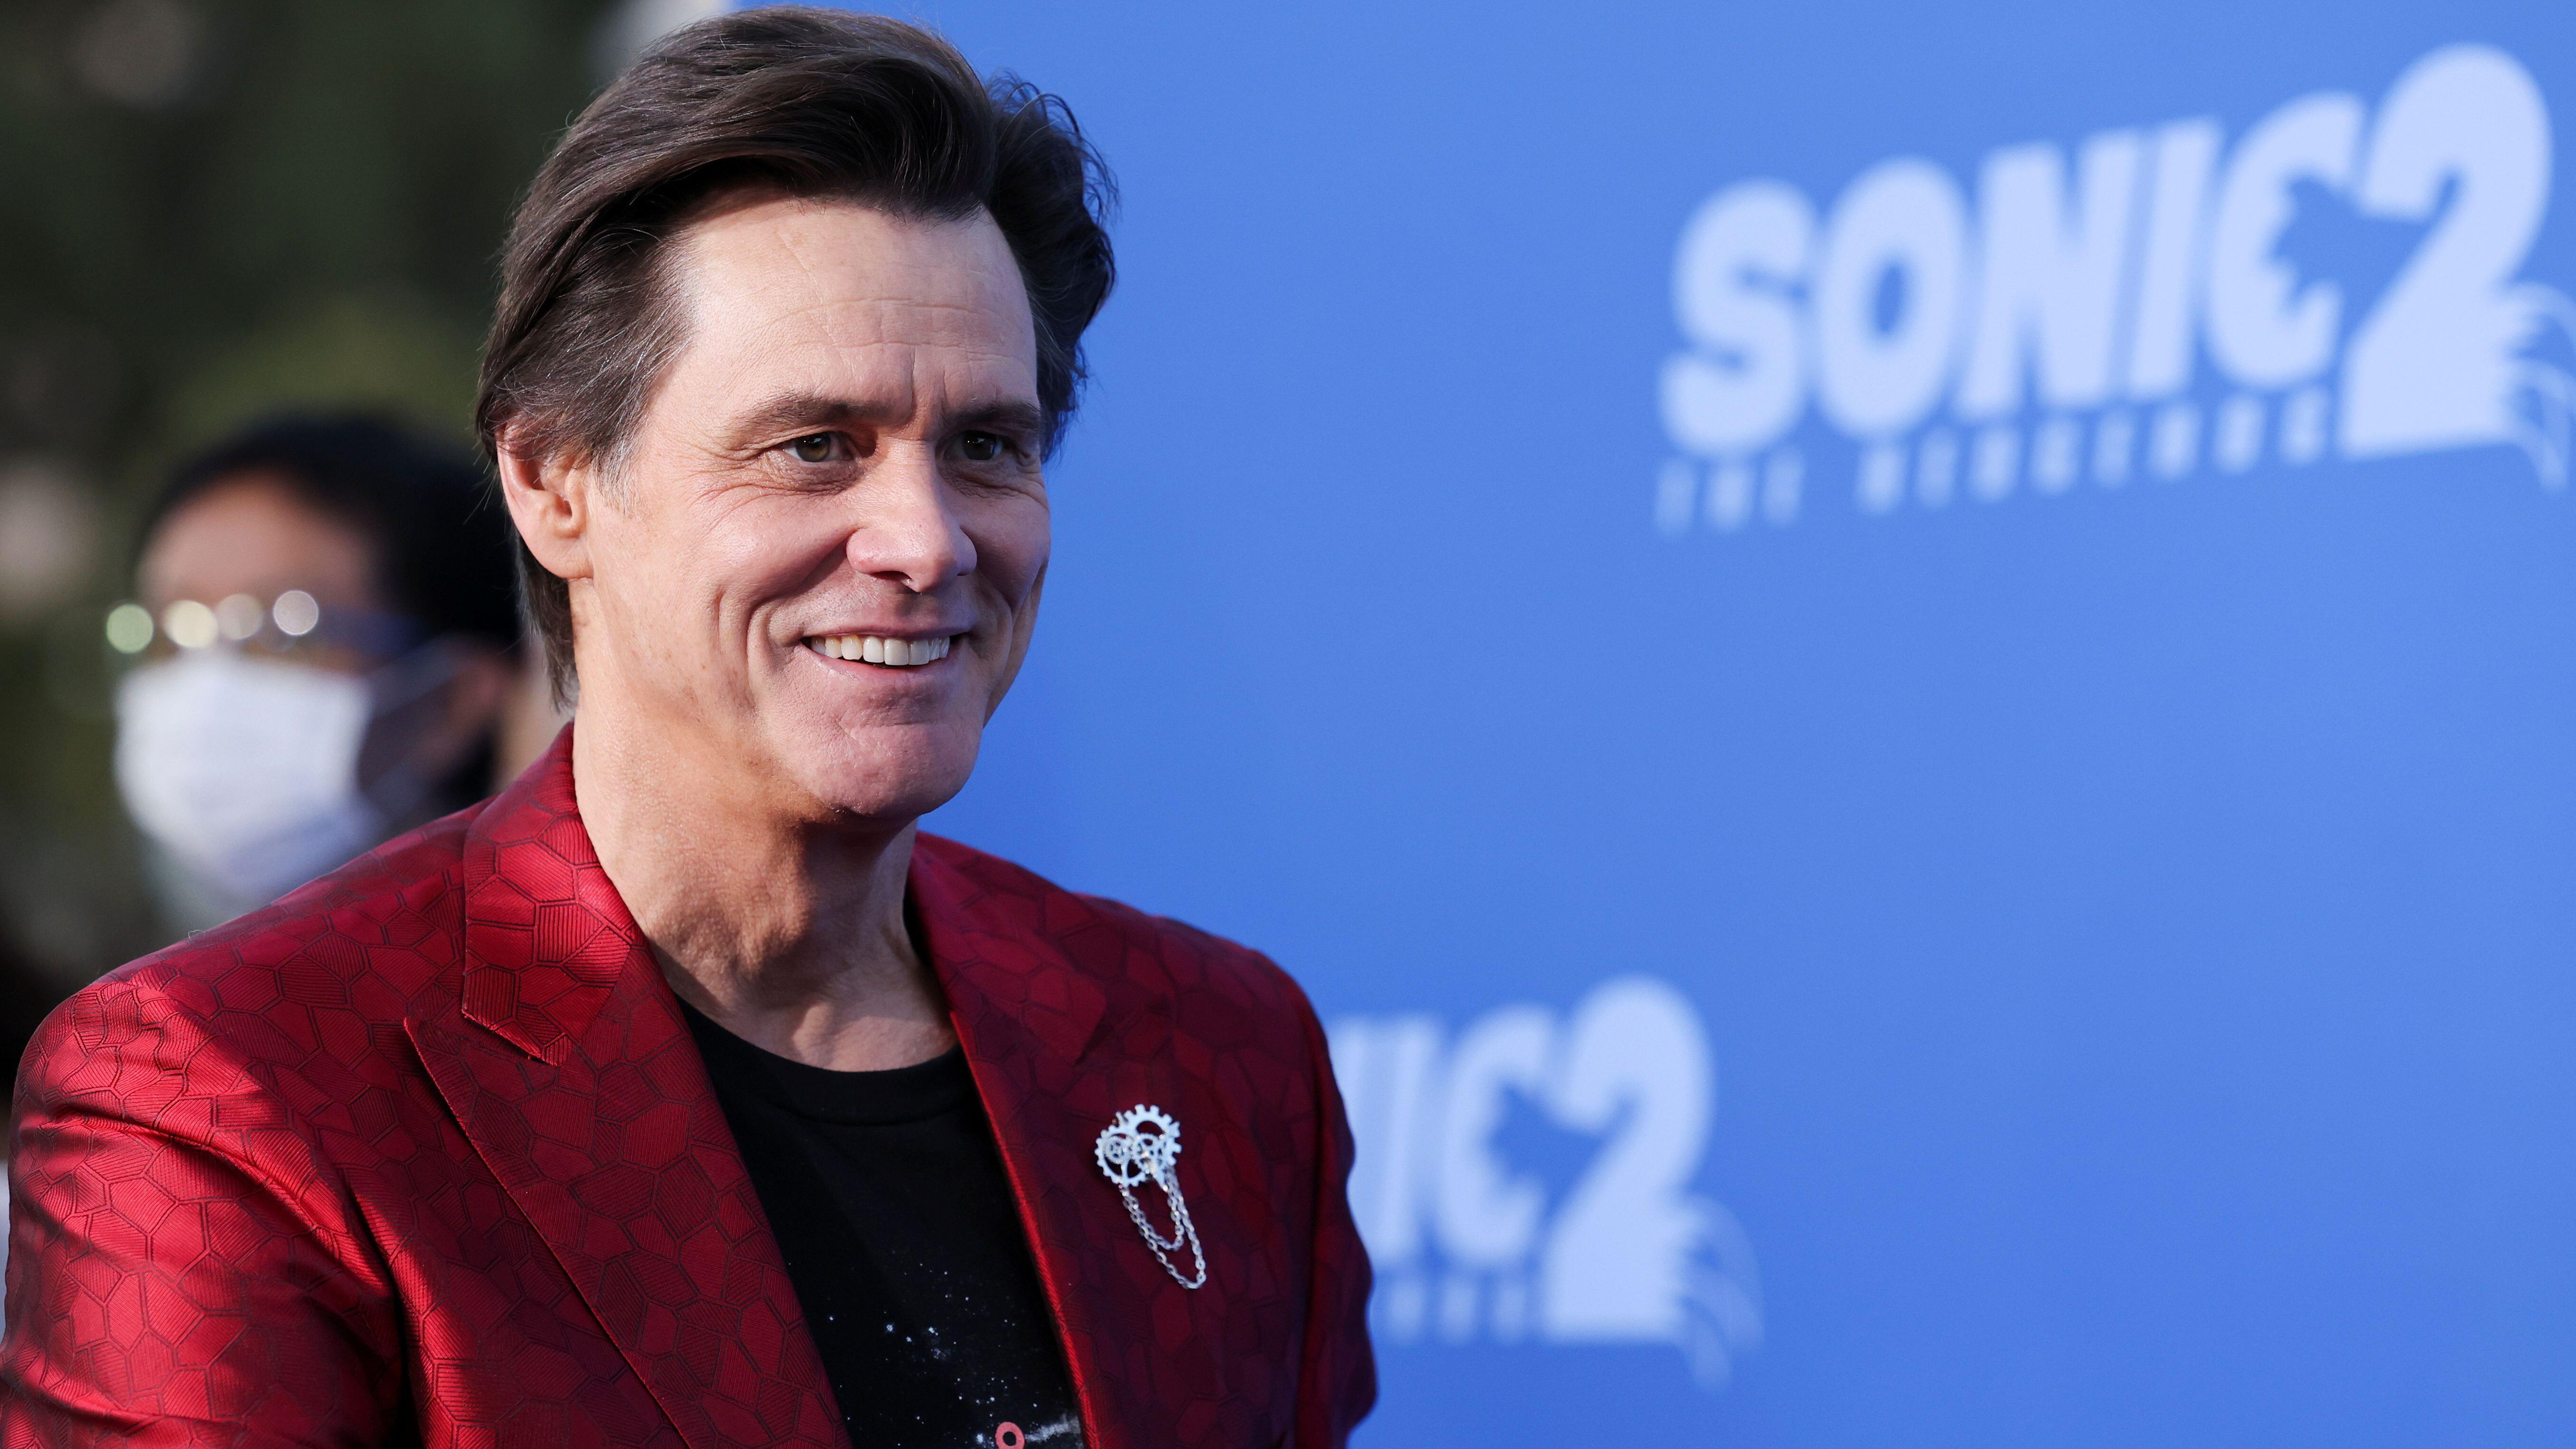 What Is Jim Carrey’s Net Worth In 2022?